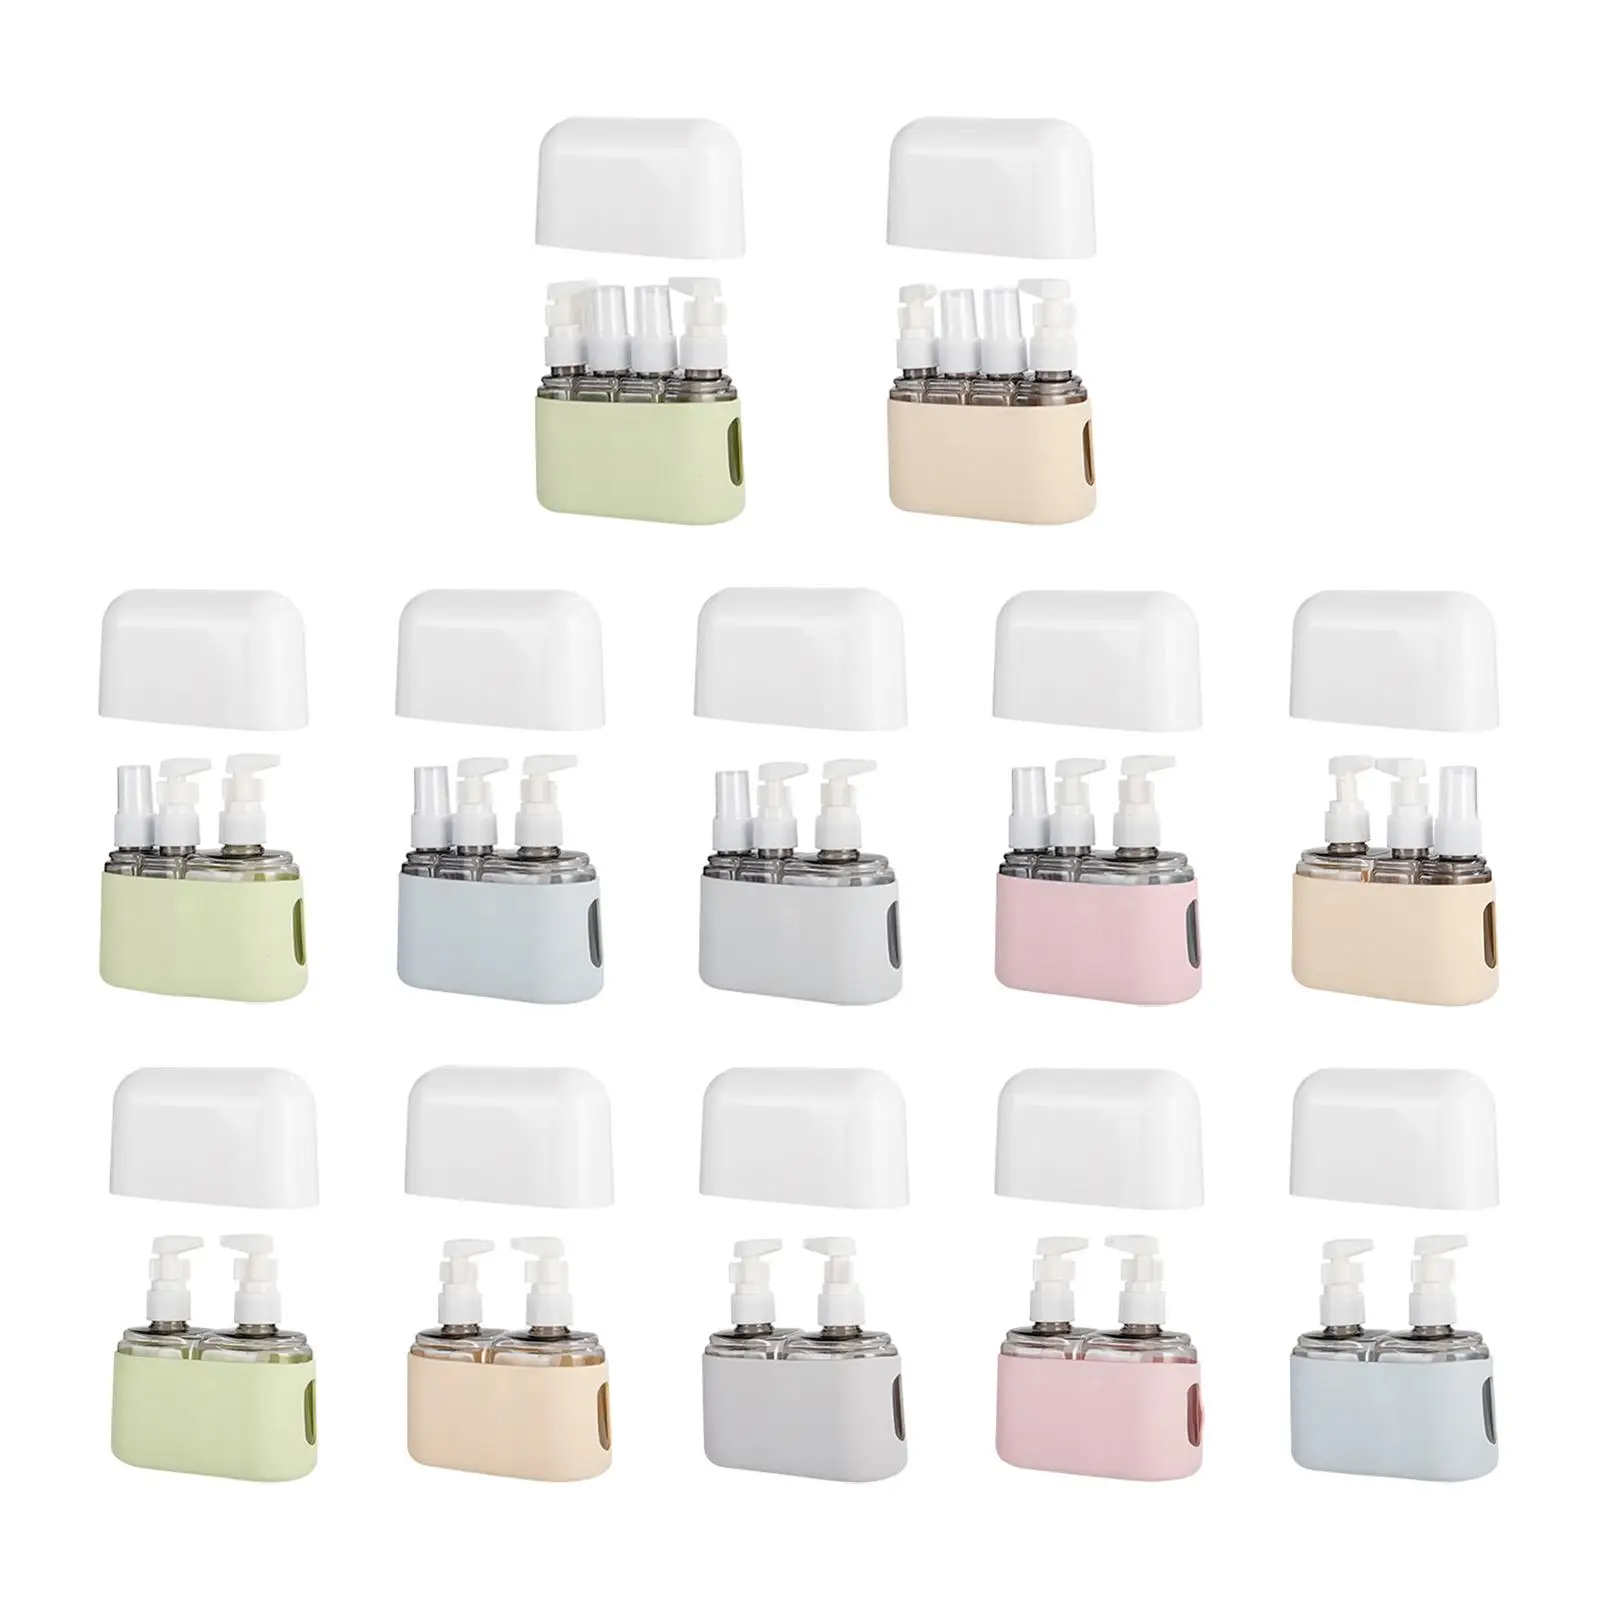 Travel Bottles for Toiletries Leakproof Compact Size Airplane Accessories for Body Wash Perfumes Cosmetics Foam Soap Conditioner creative ceramic toiletries five piece soap dispenser toothbrush holder mouthwash cup soap box bathroom storage accessories set